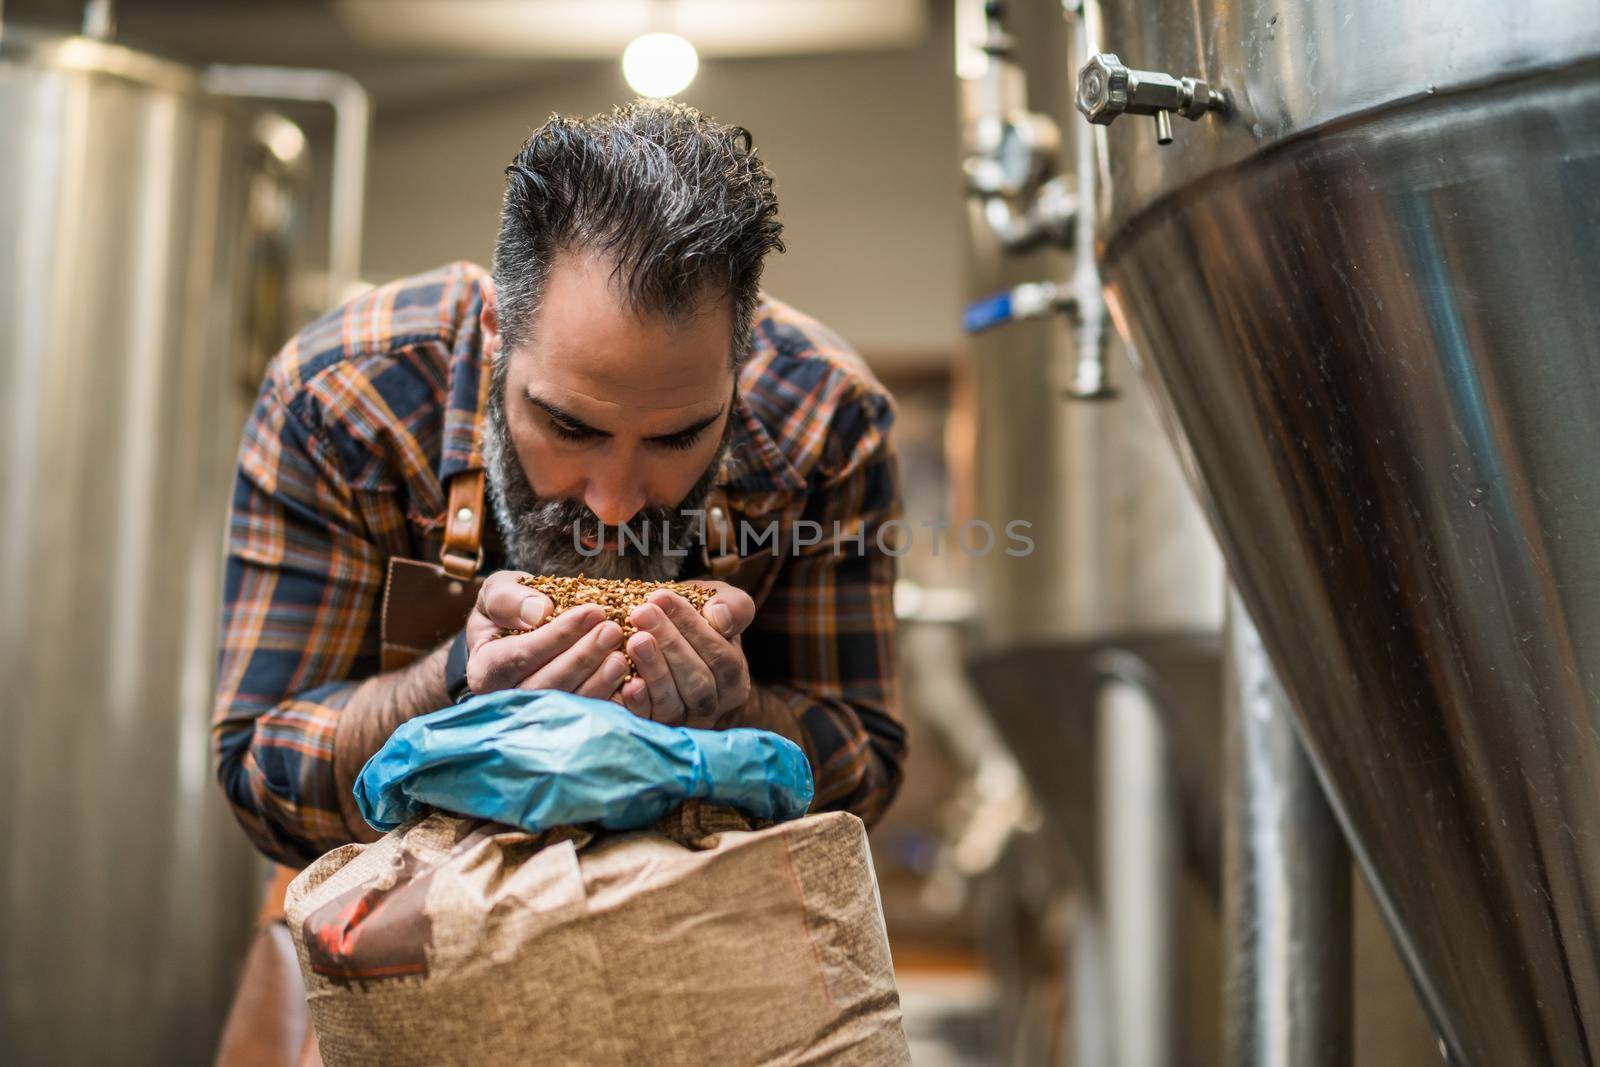 Master brewer examining the barley seeds before they enter production. Brewery technician with bag of barley in front.